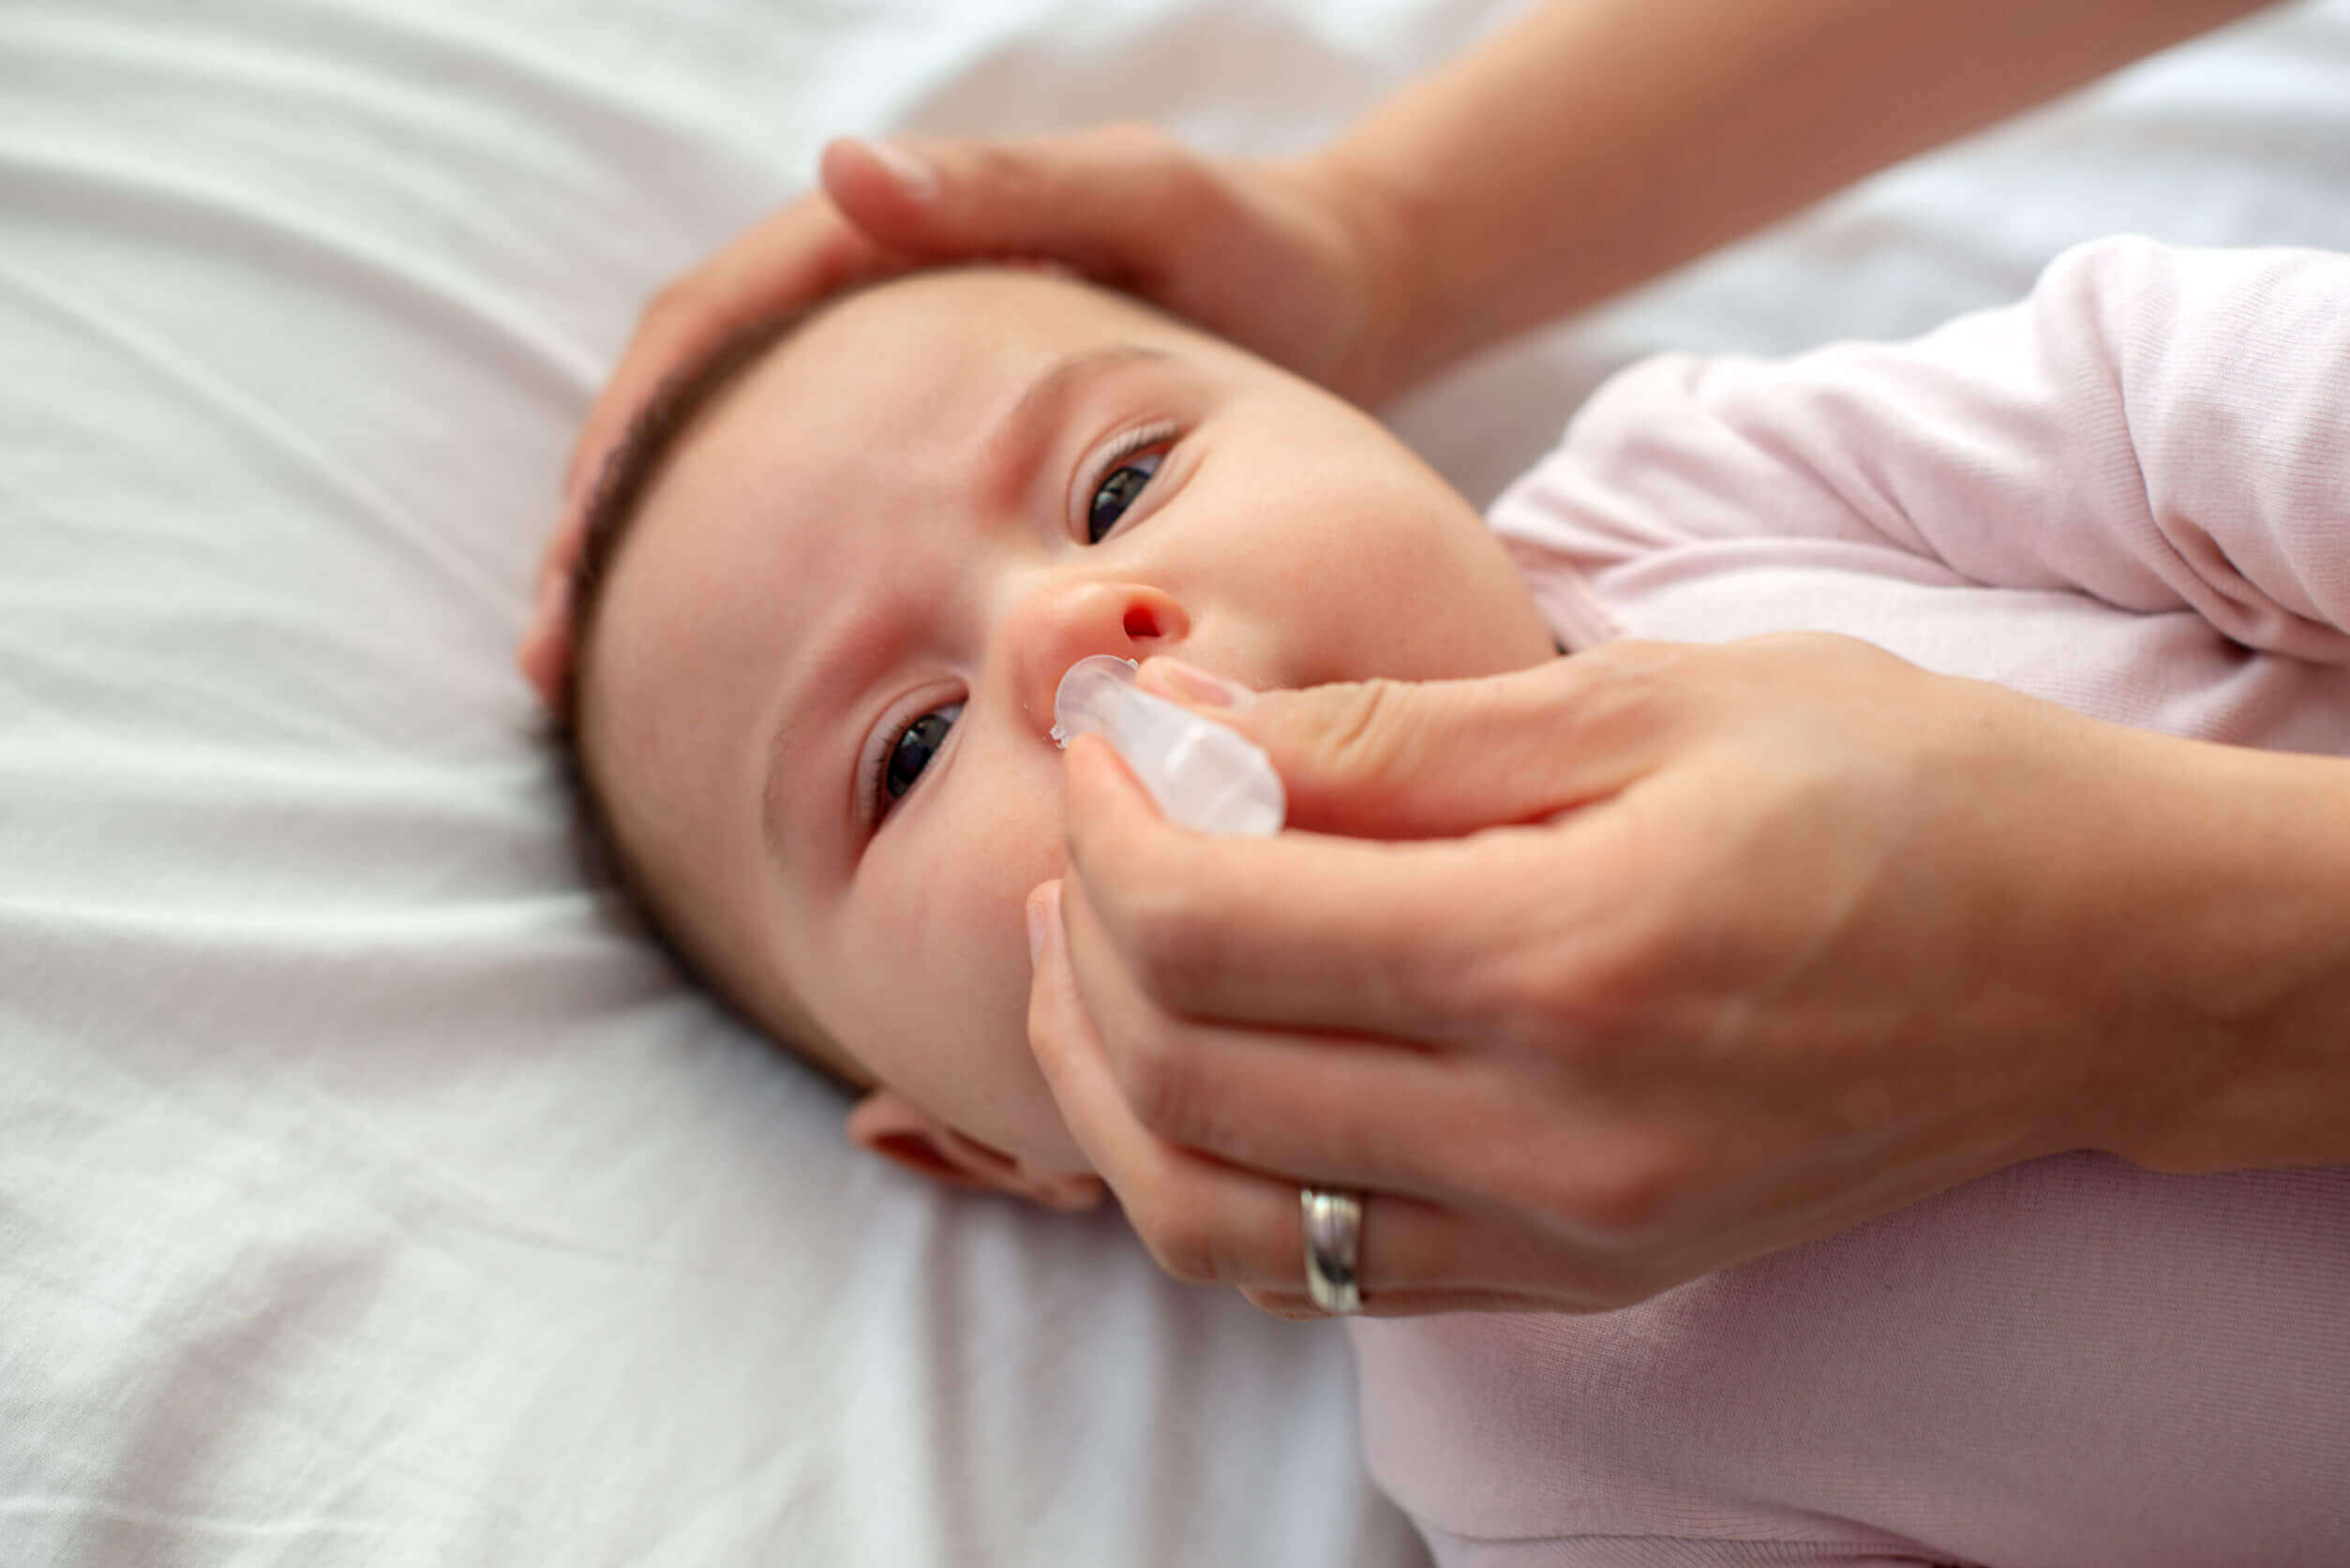 A baby getting a nasal irrigation.